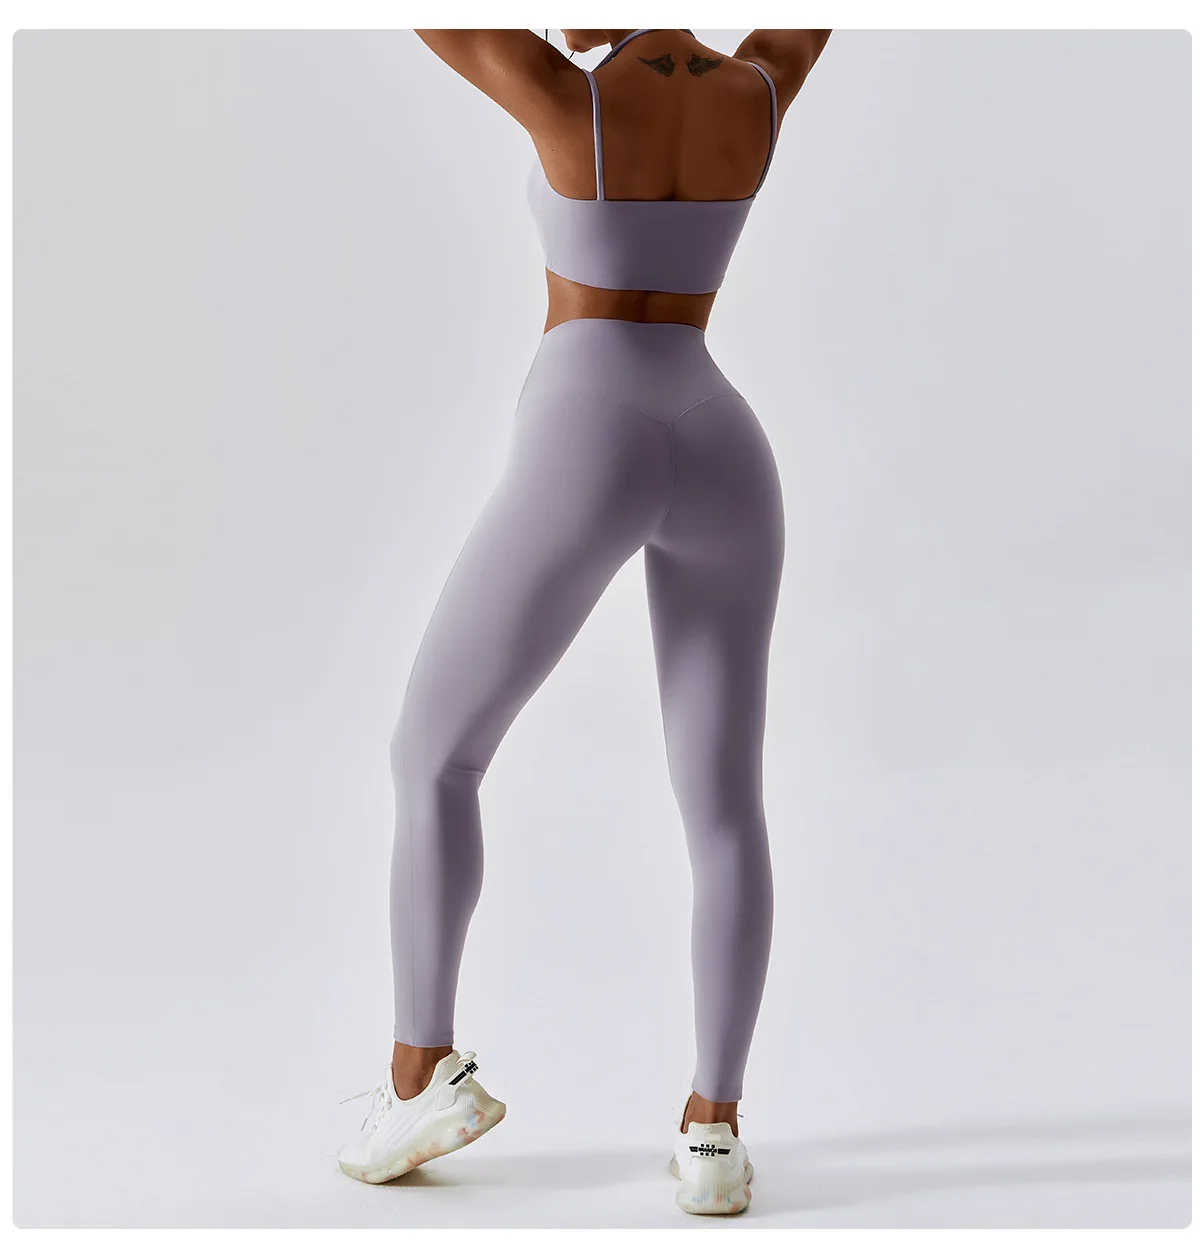 Yoga Clothing Sets Athletic Wear Women High Waist Leggings And Top Two Piece Set Seamless Gym Tracksuit Fitness Workout Outfits -Sfcce7a0721964989aacf142291fa13d4l